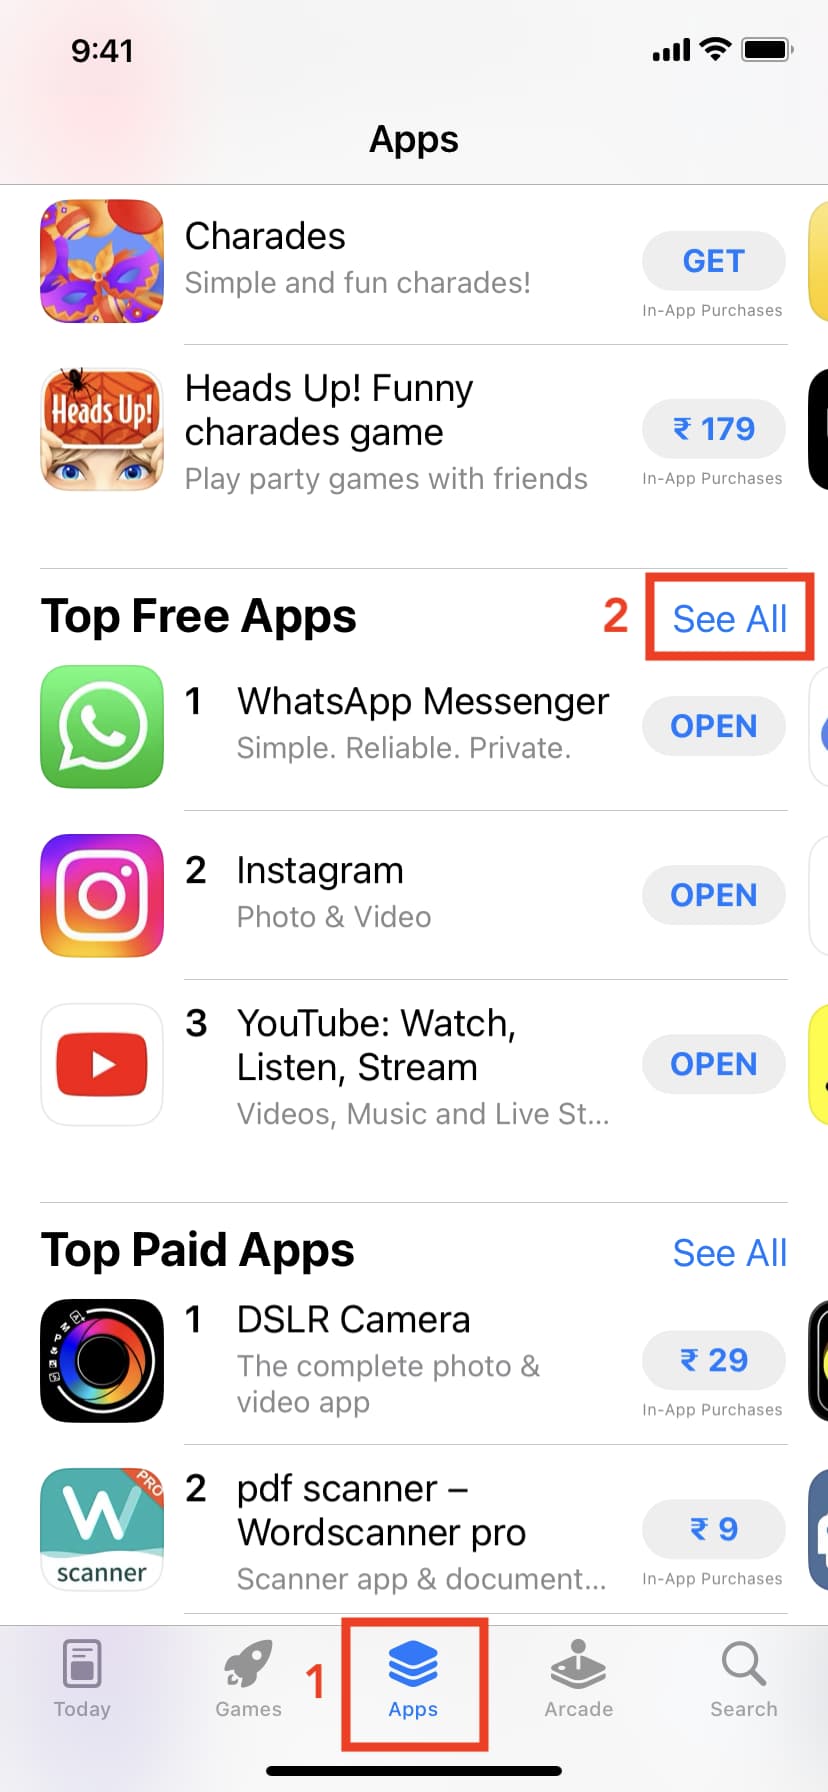 See all top free apps in iPhone App Store